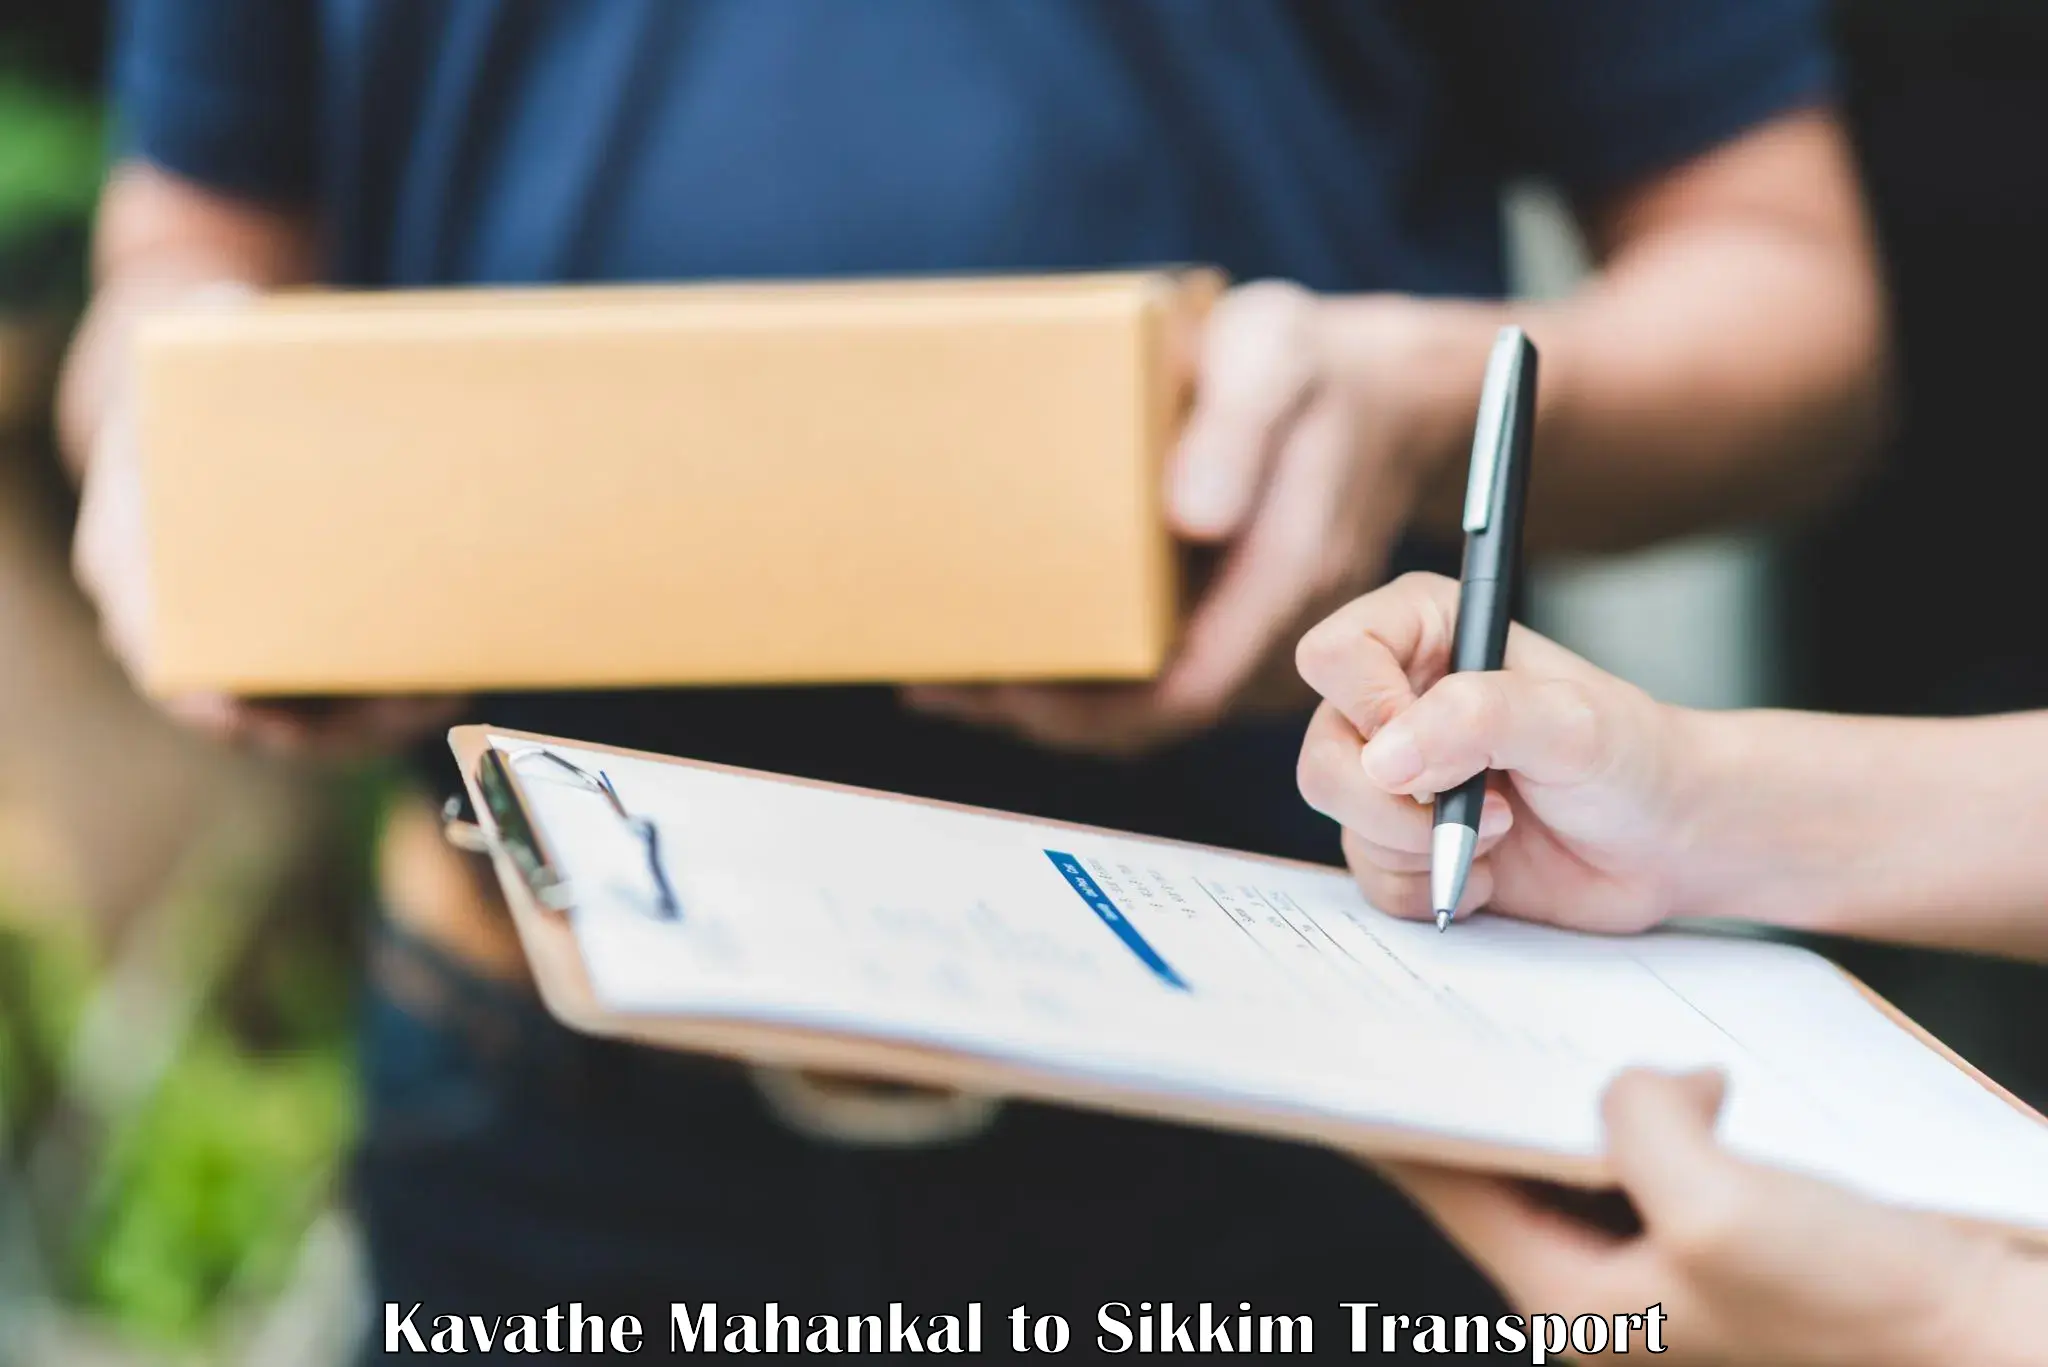 Transport in sharing Kavathe Mahankal to South Sikkim